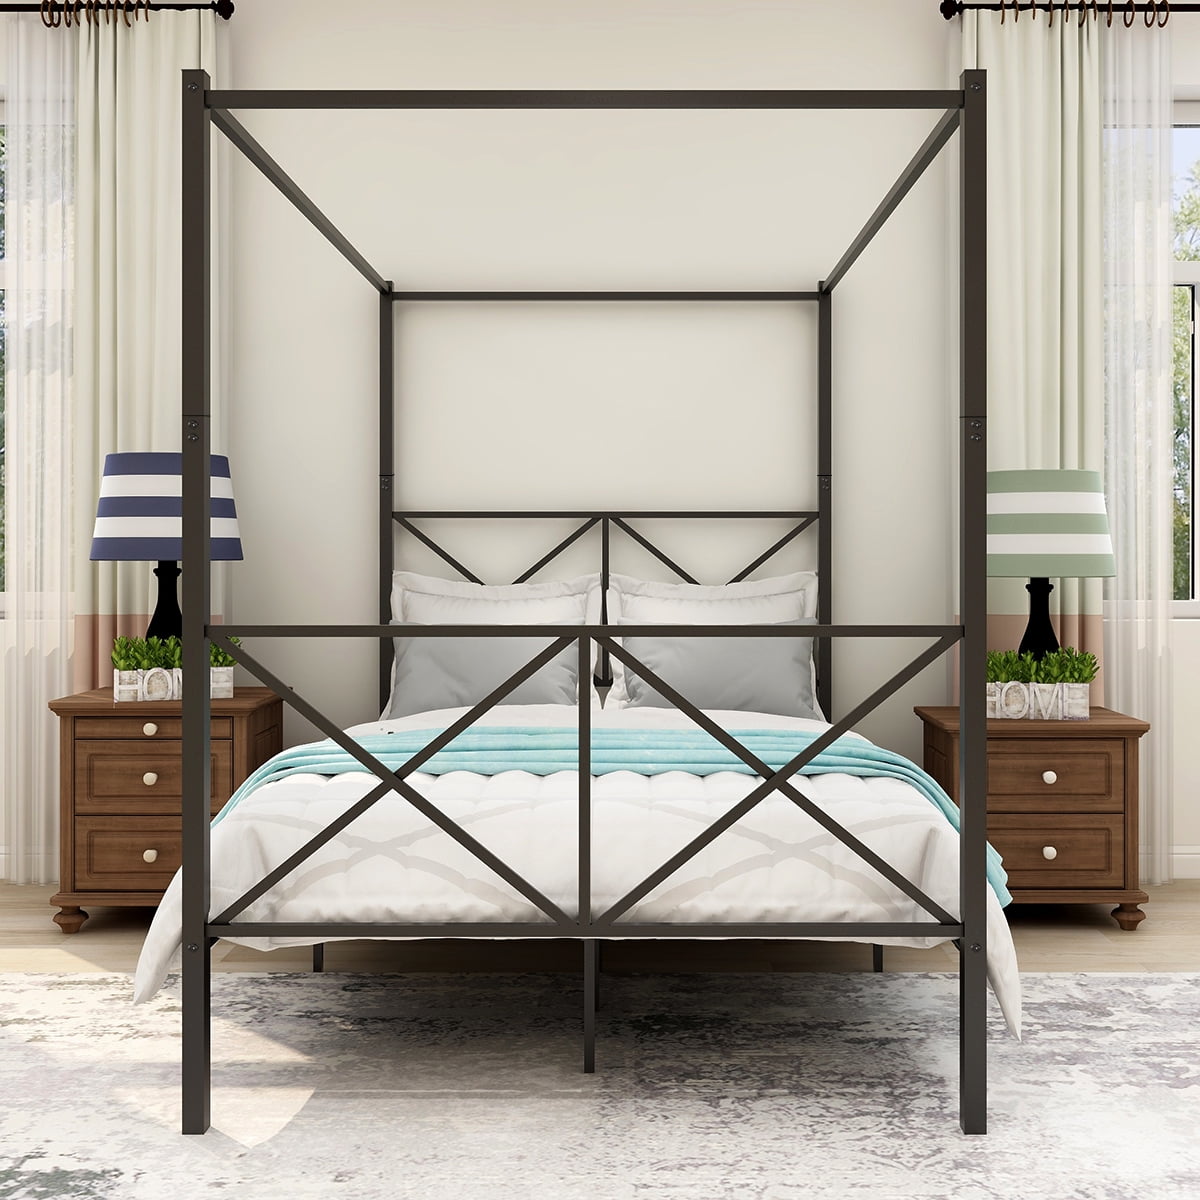 4 Post Metal Canopy Bed With Headboard, Canopy Bed With Headboard